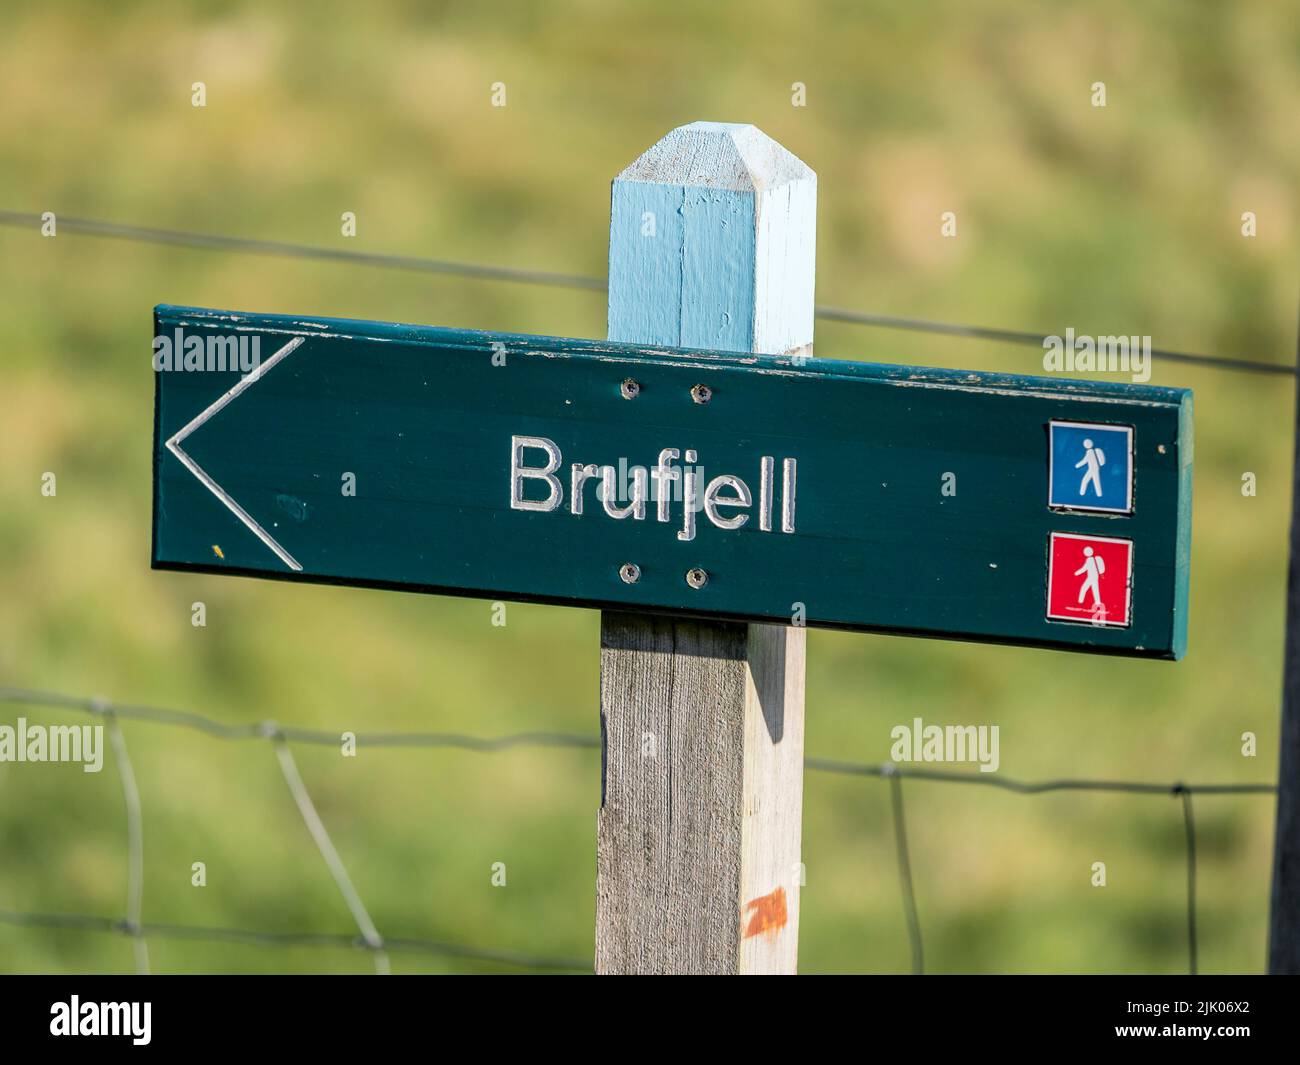 Signpost showing direction to brufjell caves, near Ana-Sira west of Flekkefjord, Norway Stock Photo